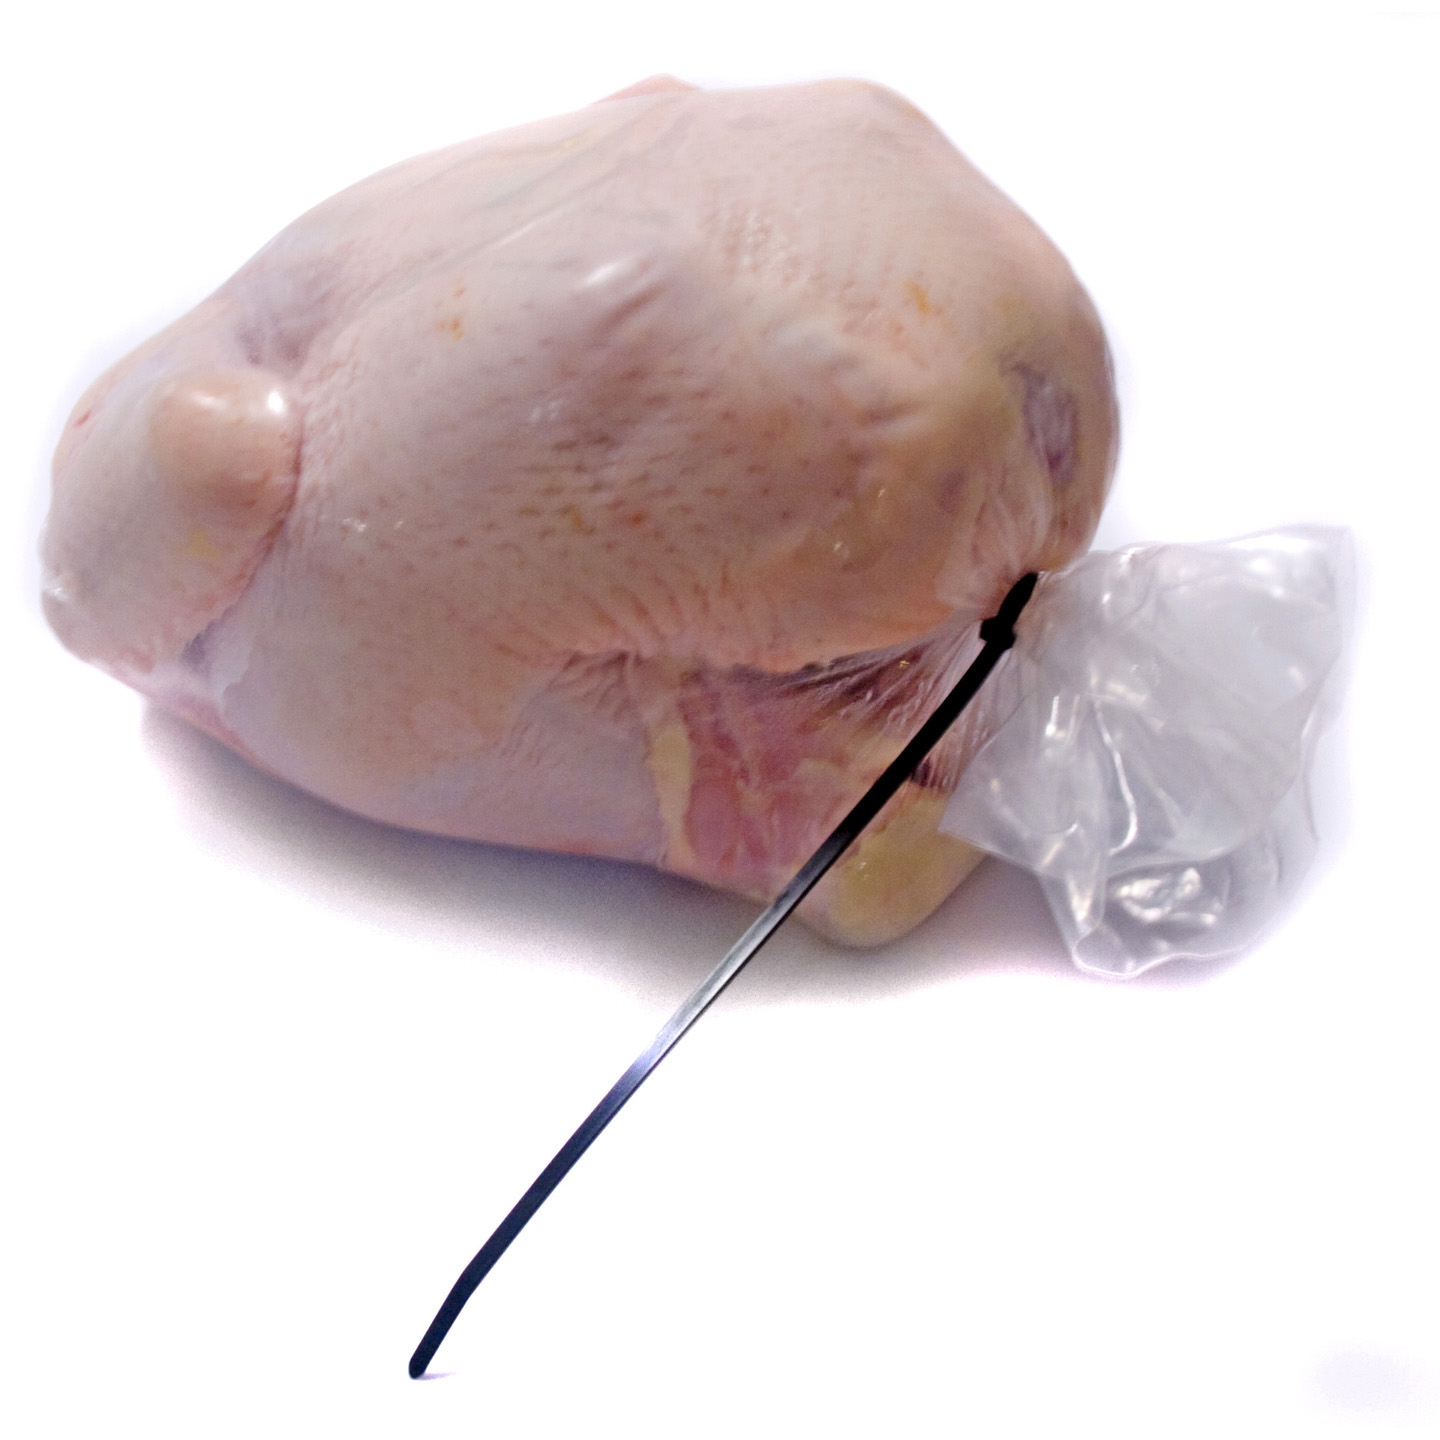 Details about   Poultry Shrink Bags 10"x18" Zip Ties and Labels MADE IN USA... 3 MIL BPA Free 